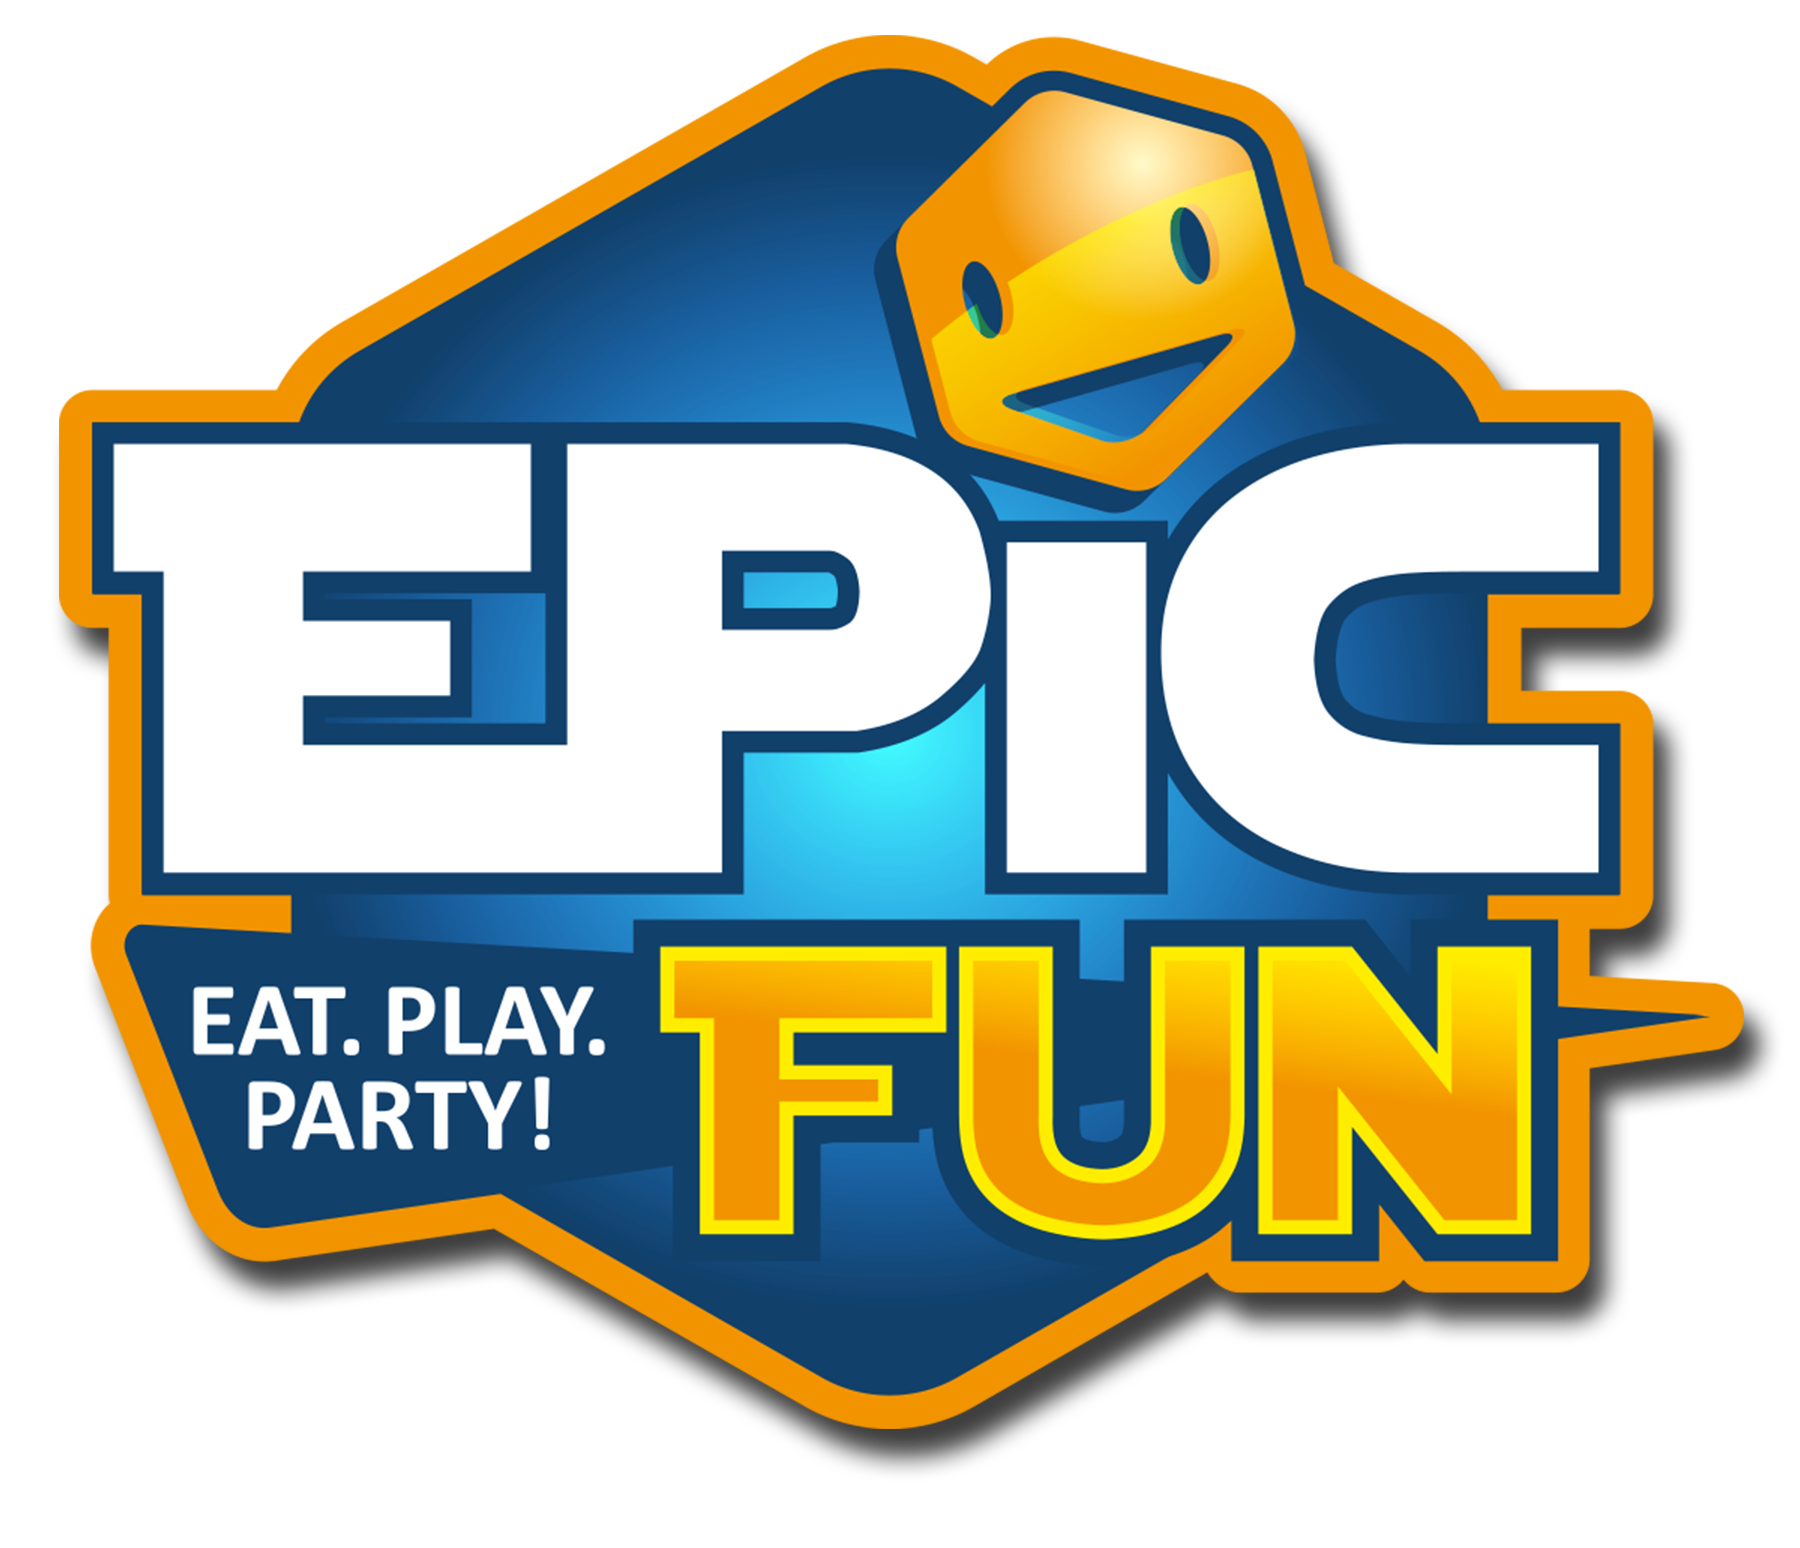 Epic Fun - Eat. Play. Party!